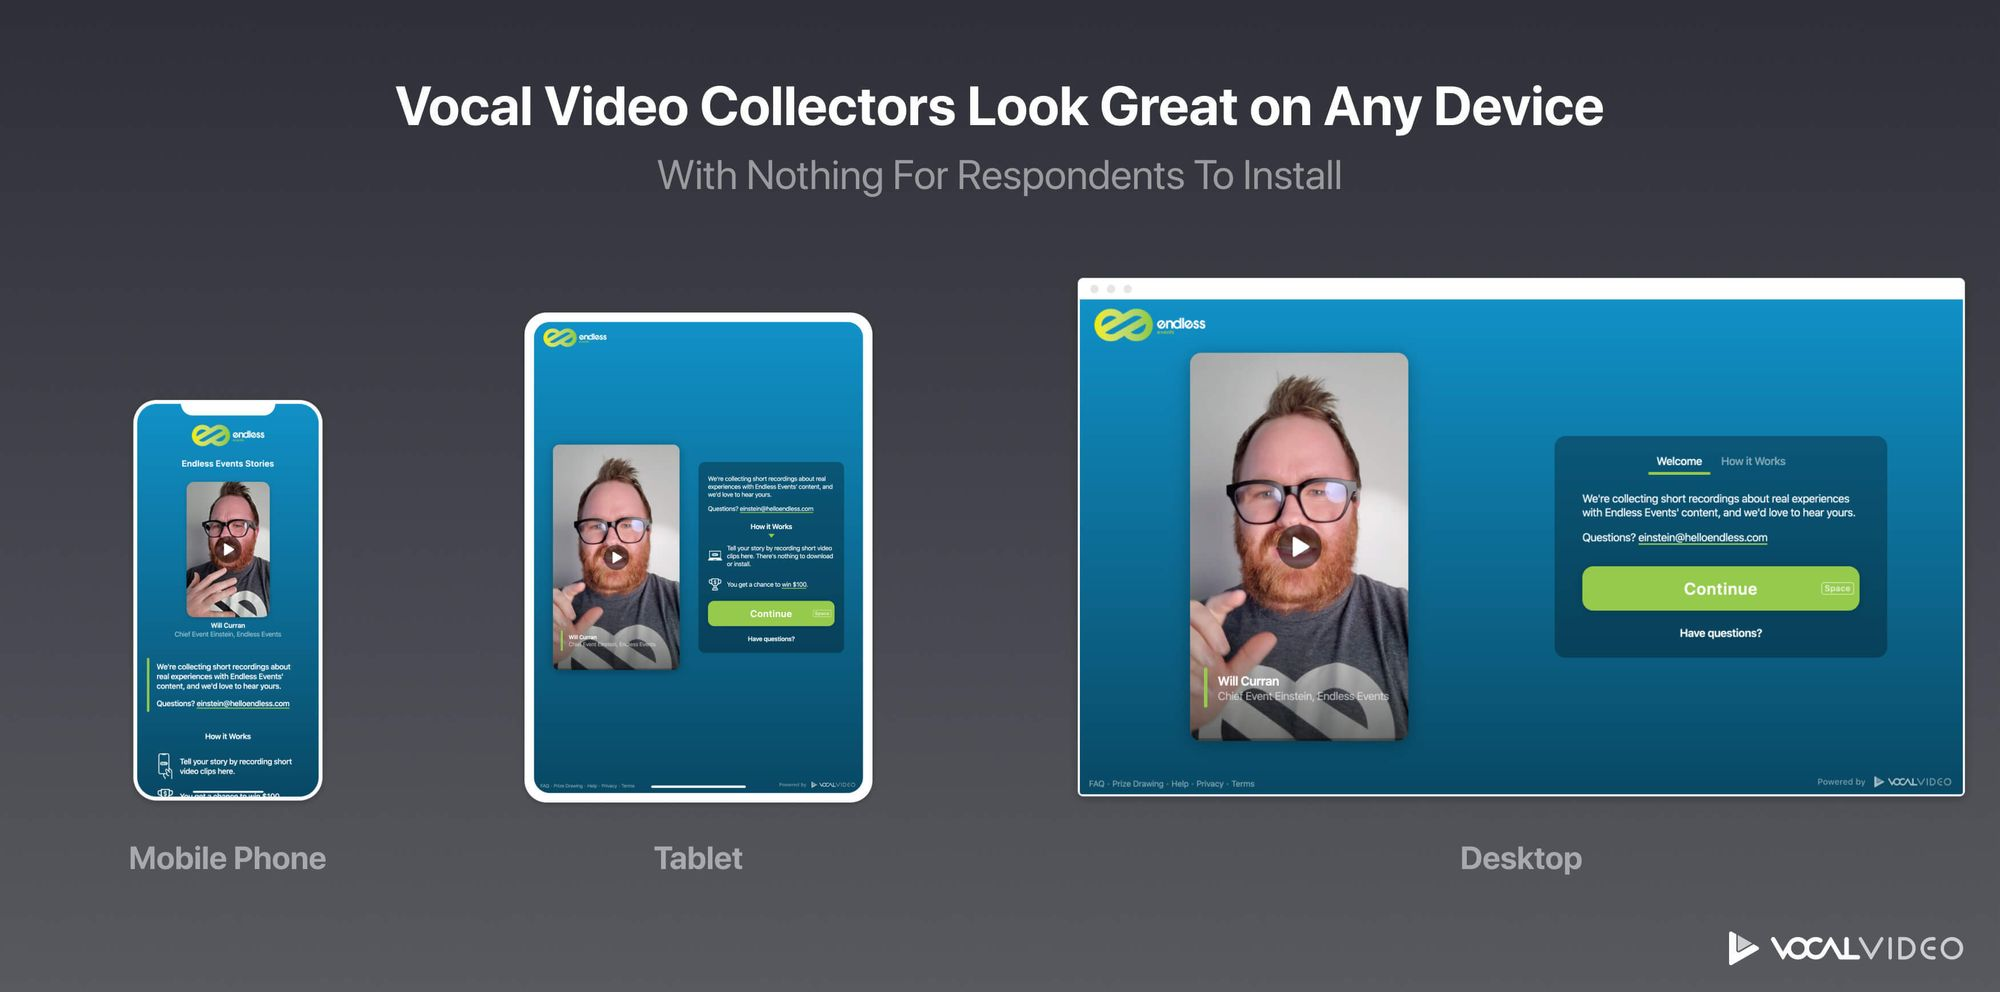 Vocal Video Collectors Look Great on Any Device (Mobile, Tablet, Desktop, etc.)